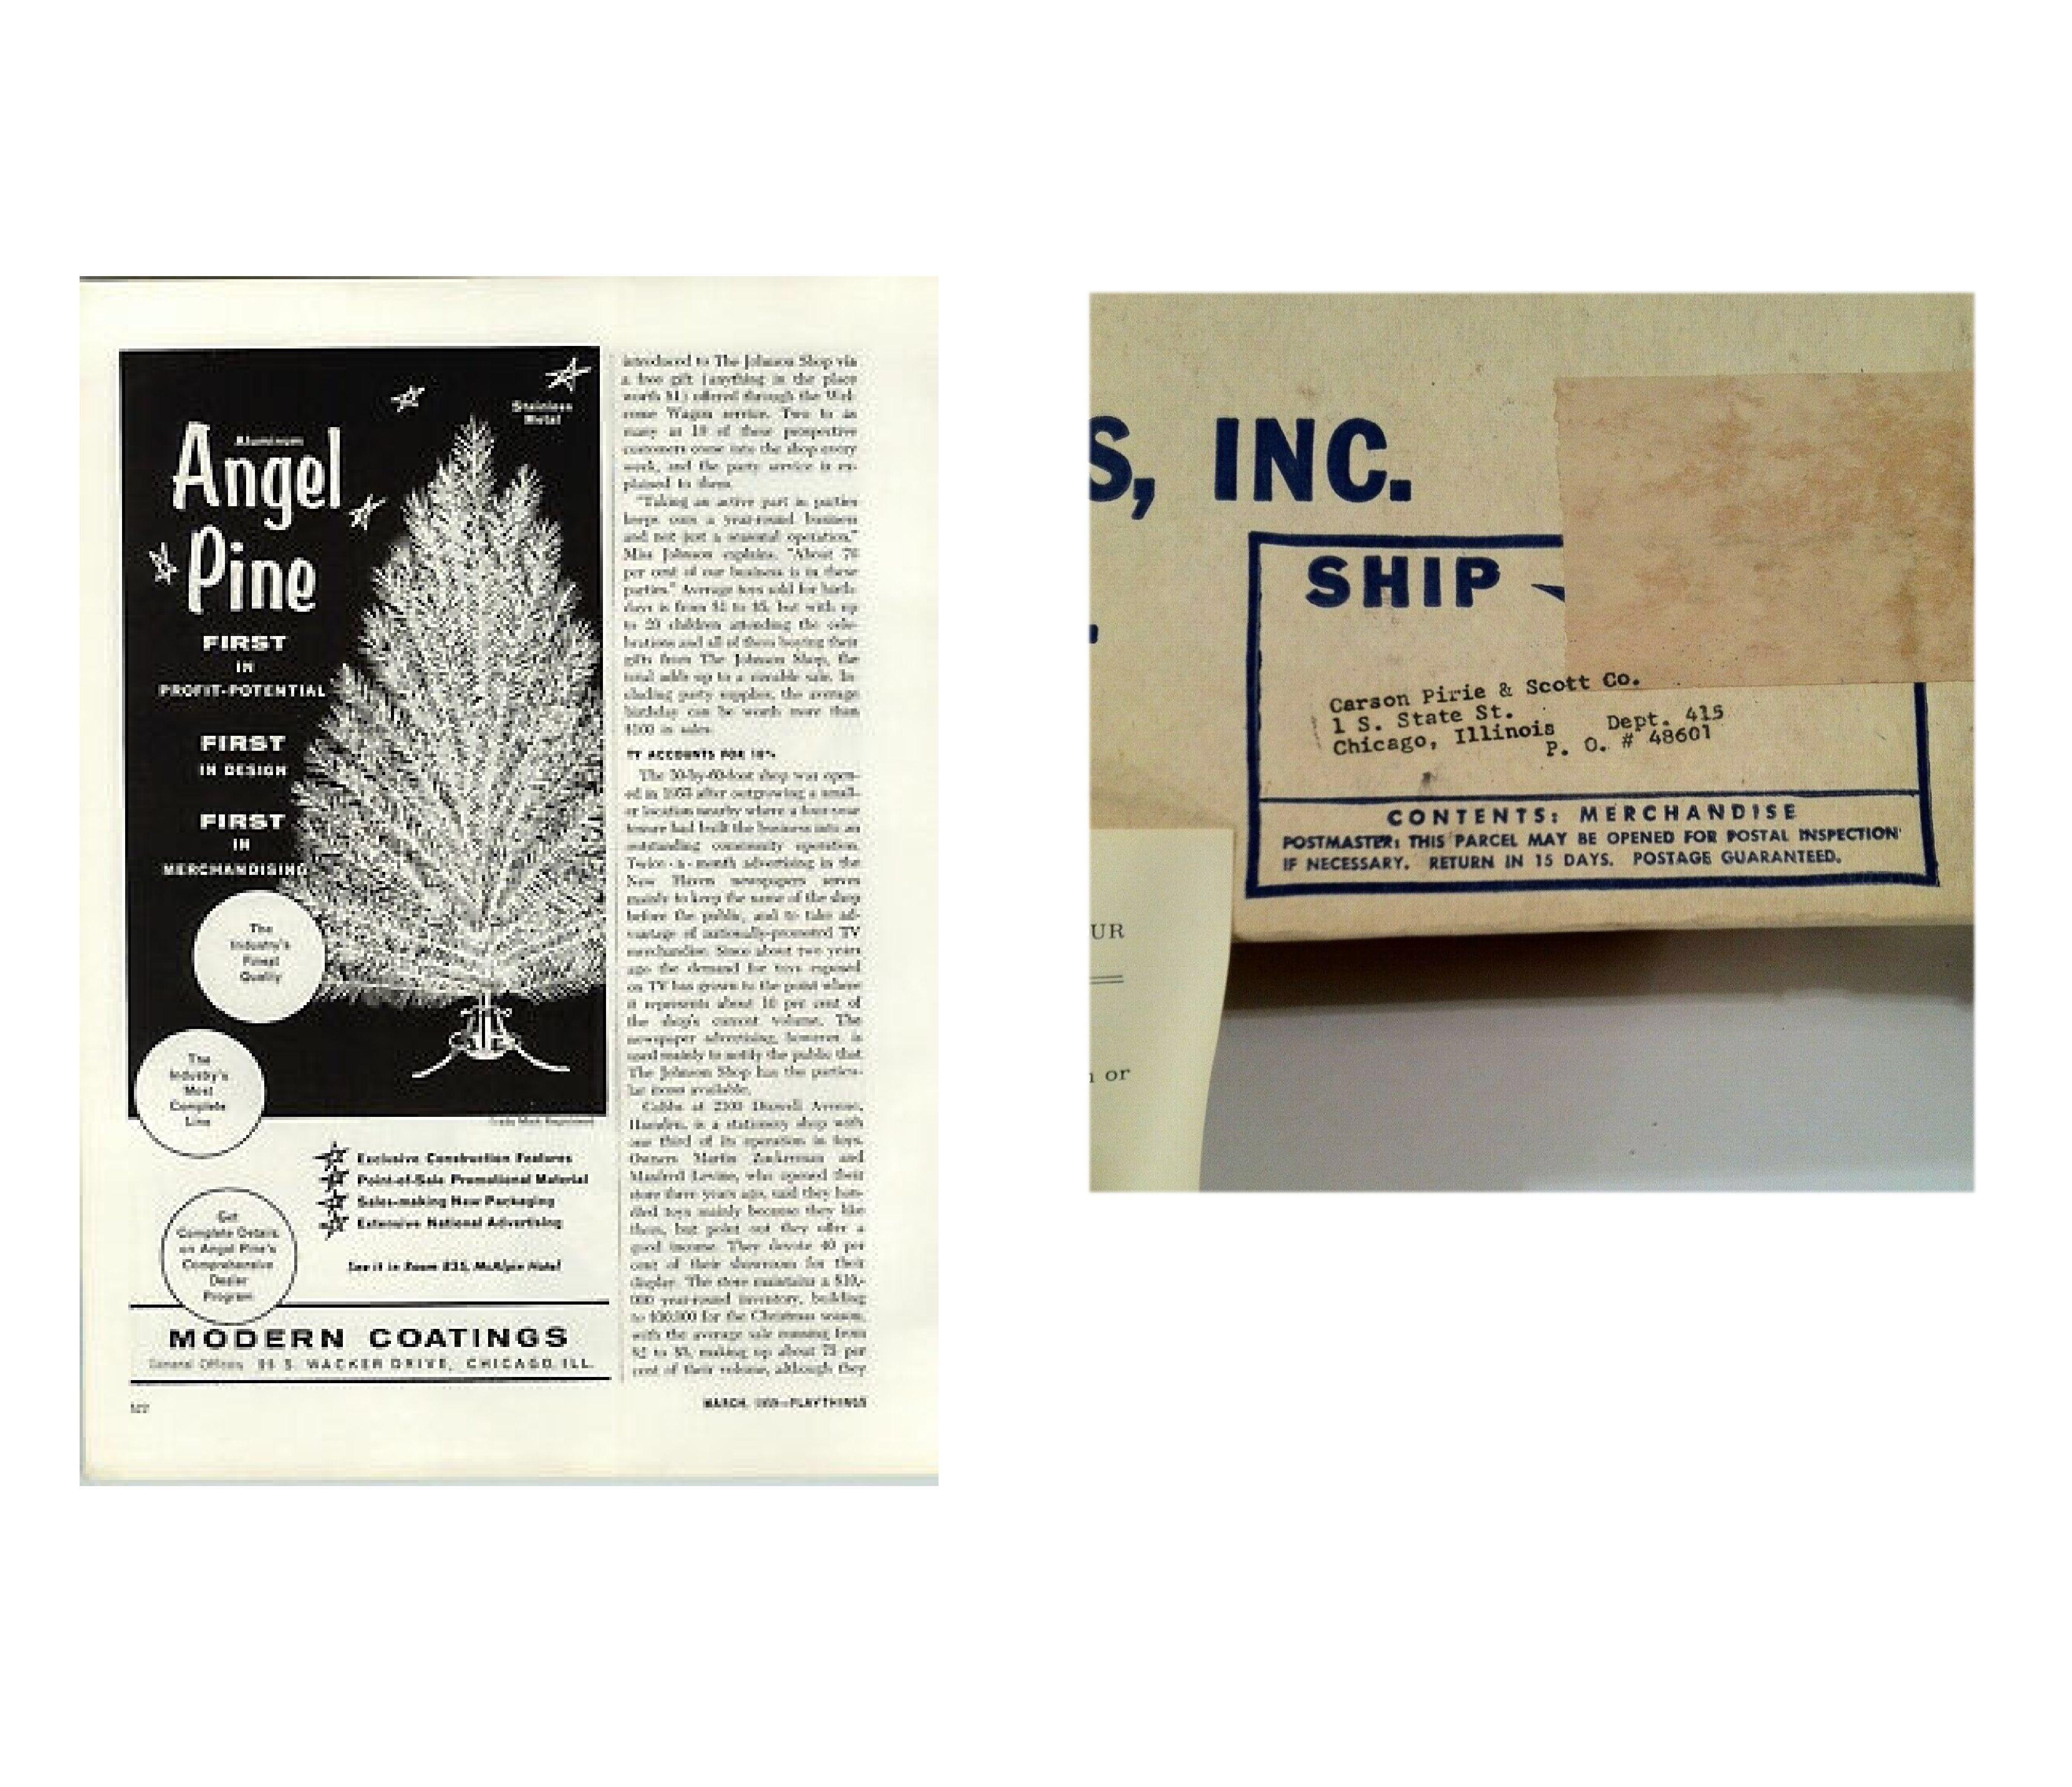 Mid-Century Modern coatings Aluminum Christmas Tree New in Box 1959, Modern Coating Company (MCC) invented the aluminum Christmas tree in 1957. The Chicago-based company produced the high-end aluminum tree, ‘The Angel Pine” with a central wooden